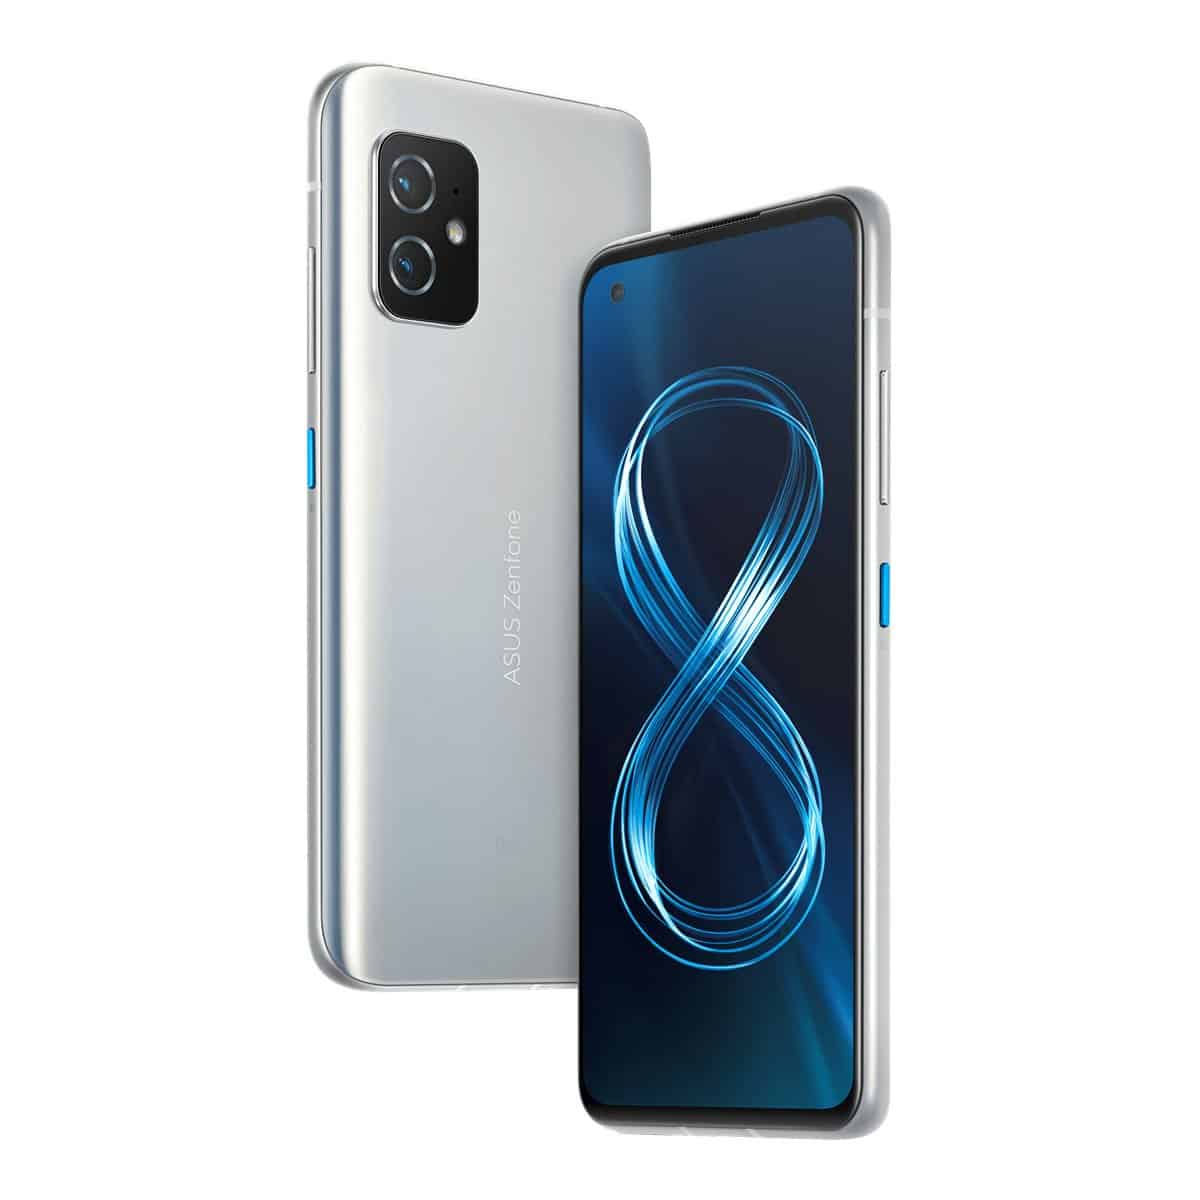 ASUS unveils Zenfone 8 and Zenfone 8 Flip at €599 and €799 respectively